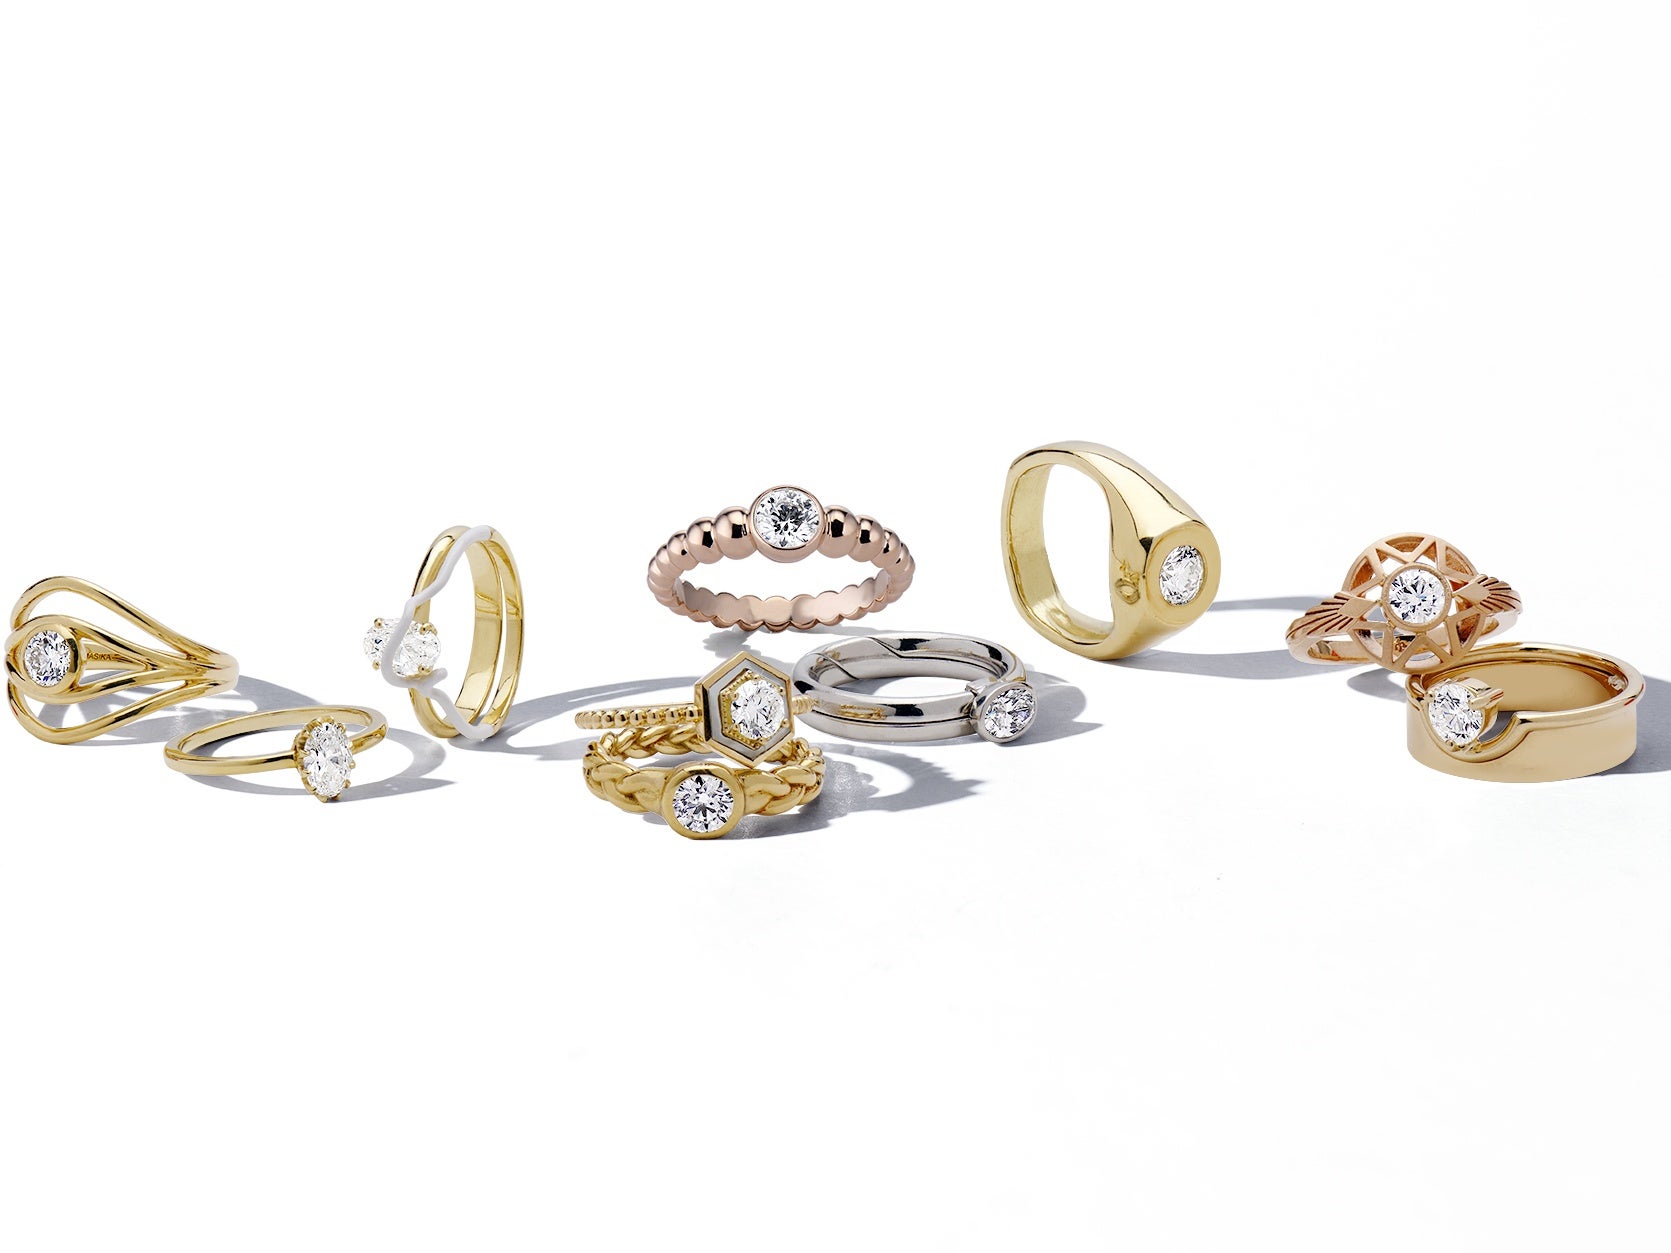 Blue Nile Partners With 10 Jewelry Designers